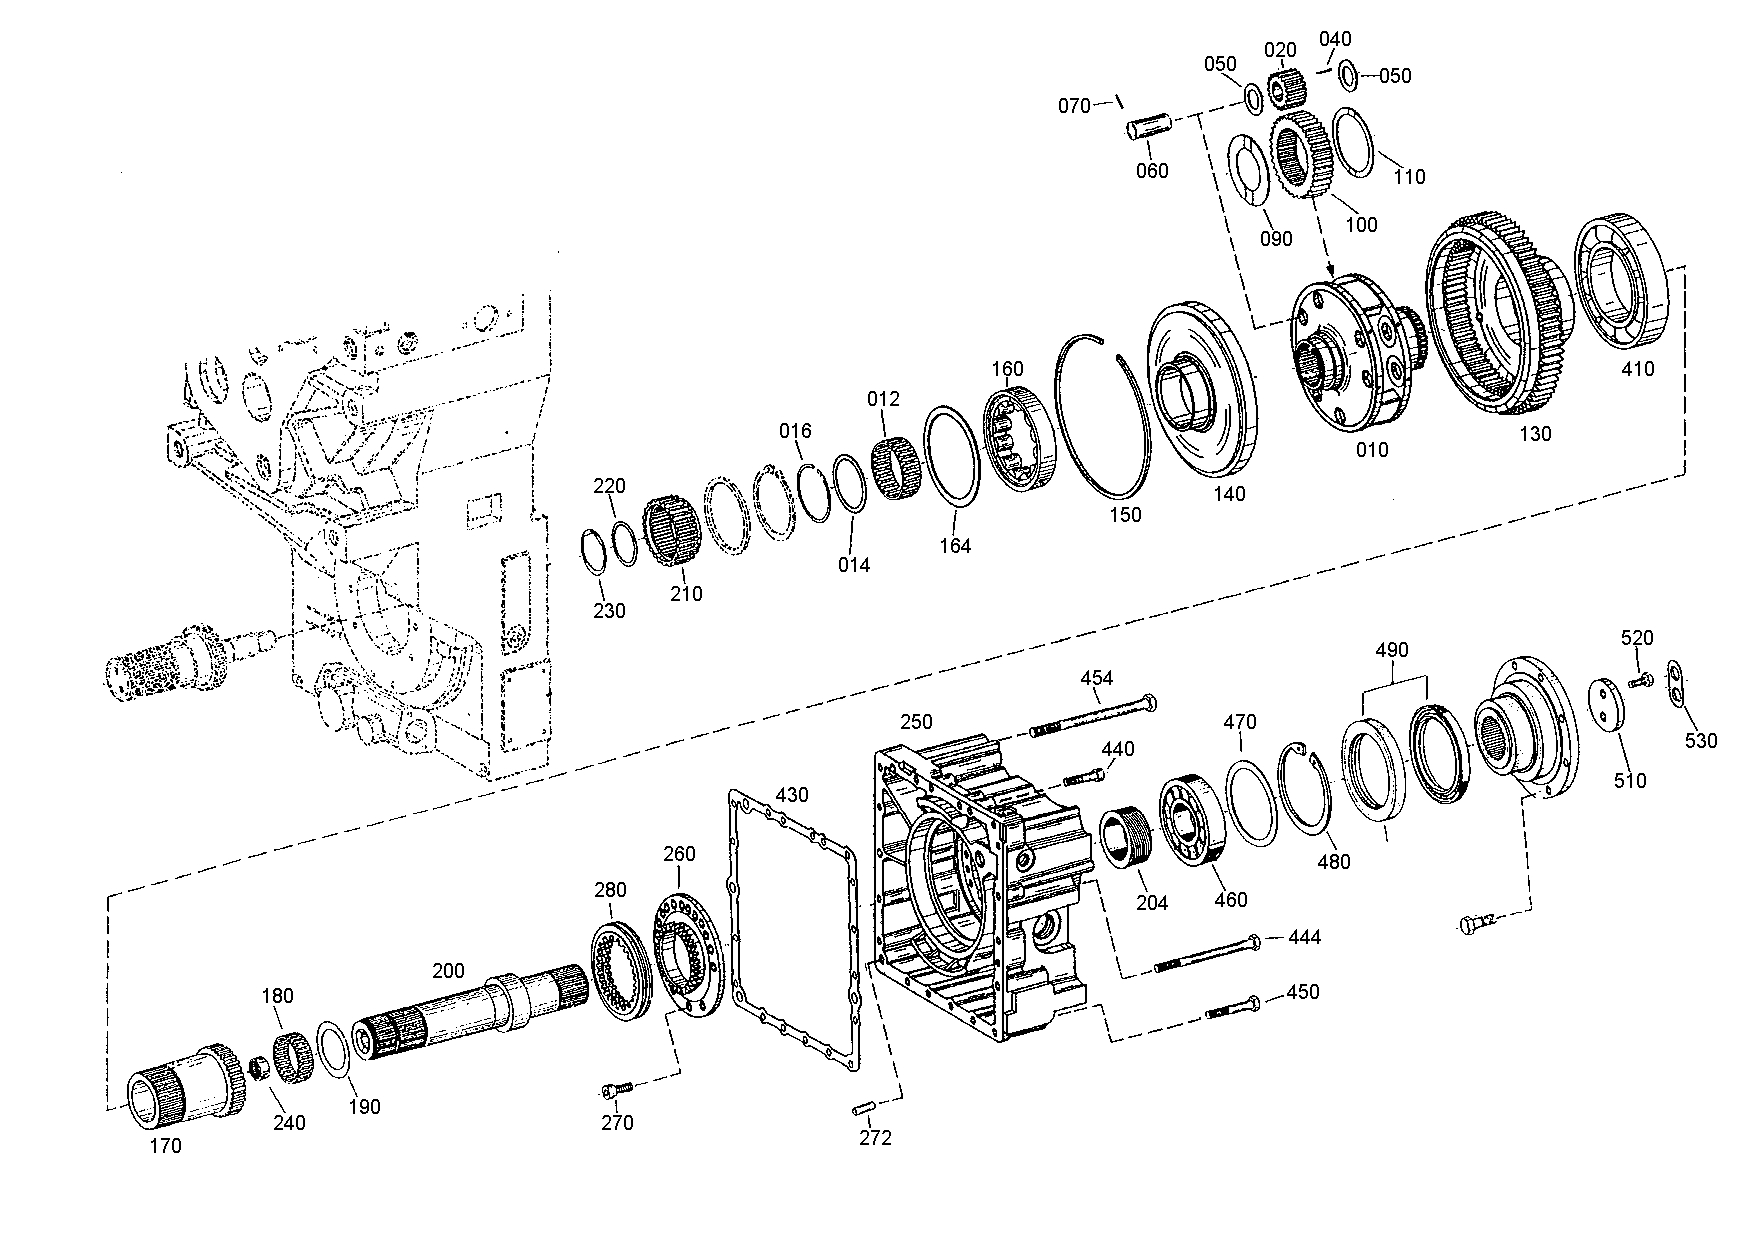 drawing for LIEBHERR GMBH MAIER FRITZ - WASHER (figure 1)